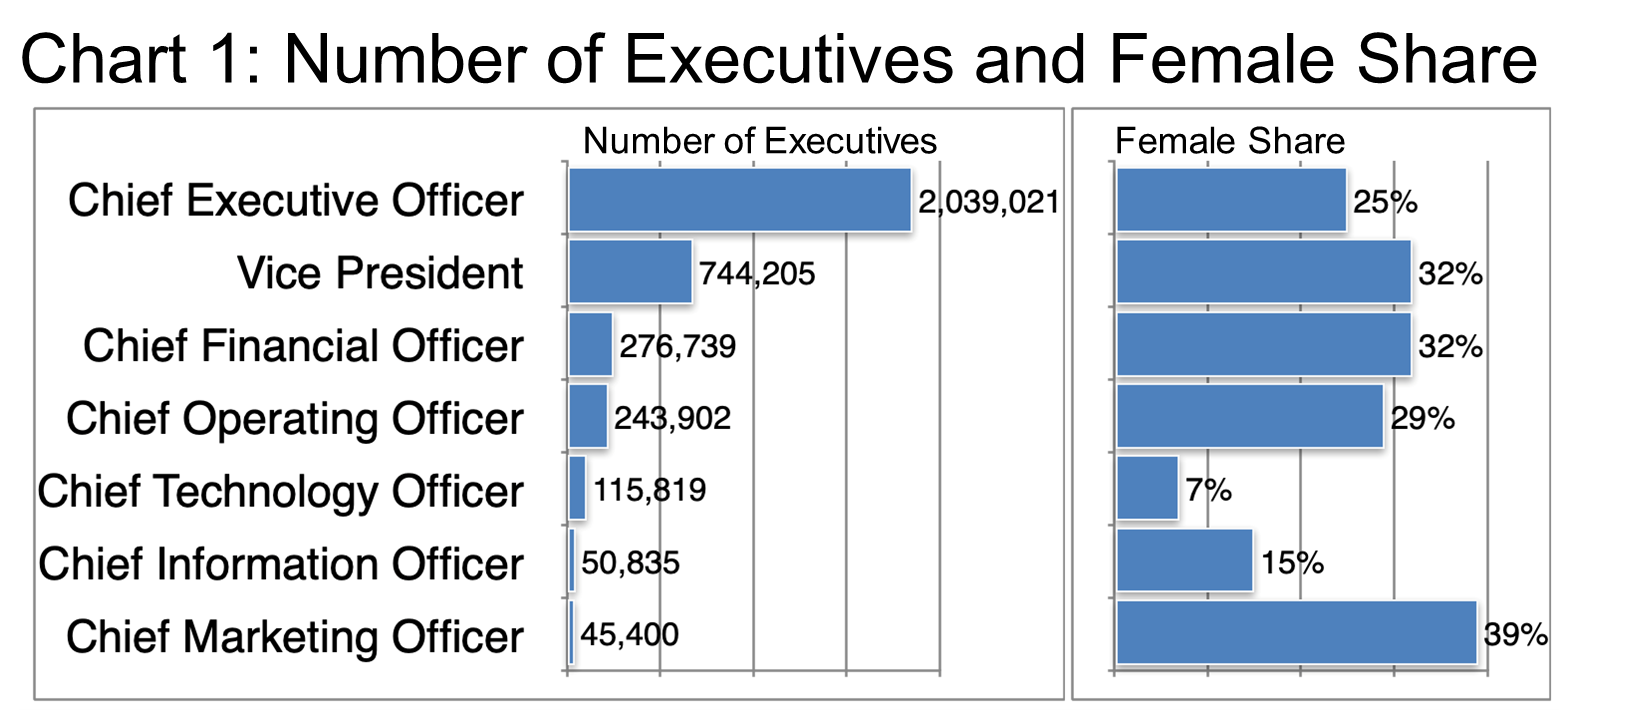 Number of Executives and Female Share-Chart 1